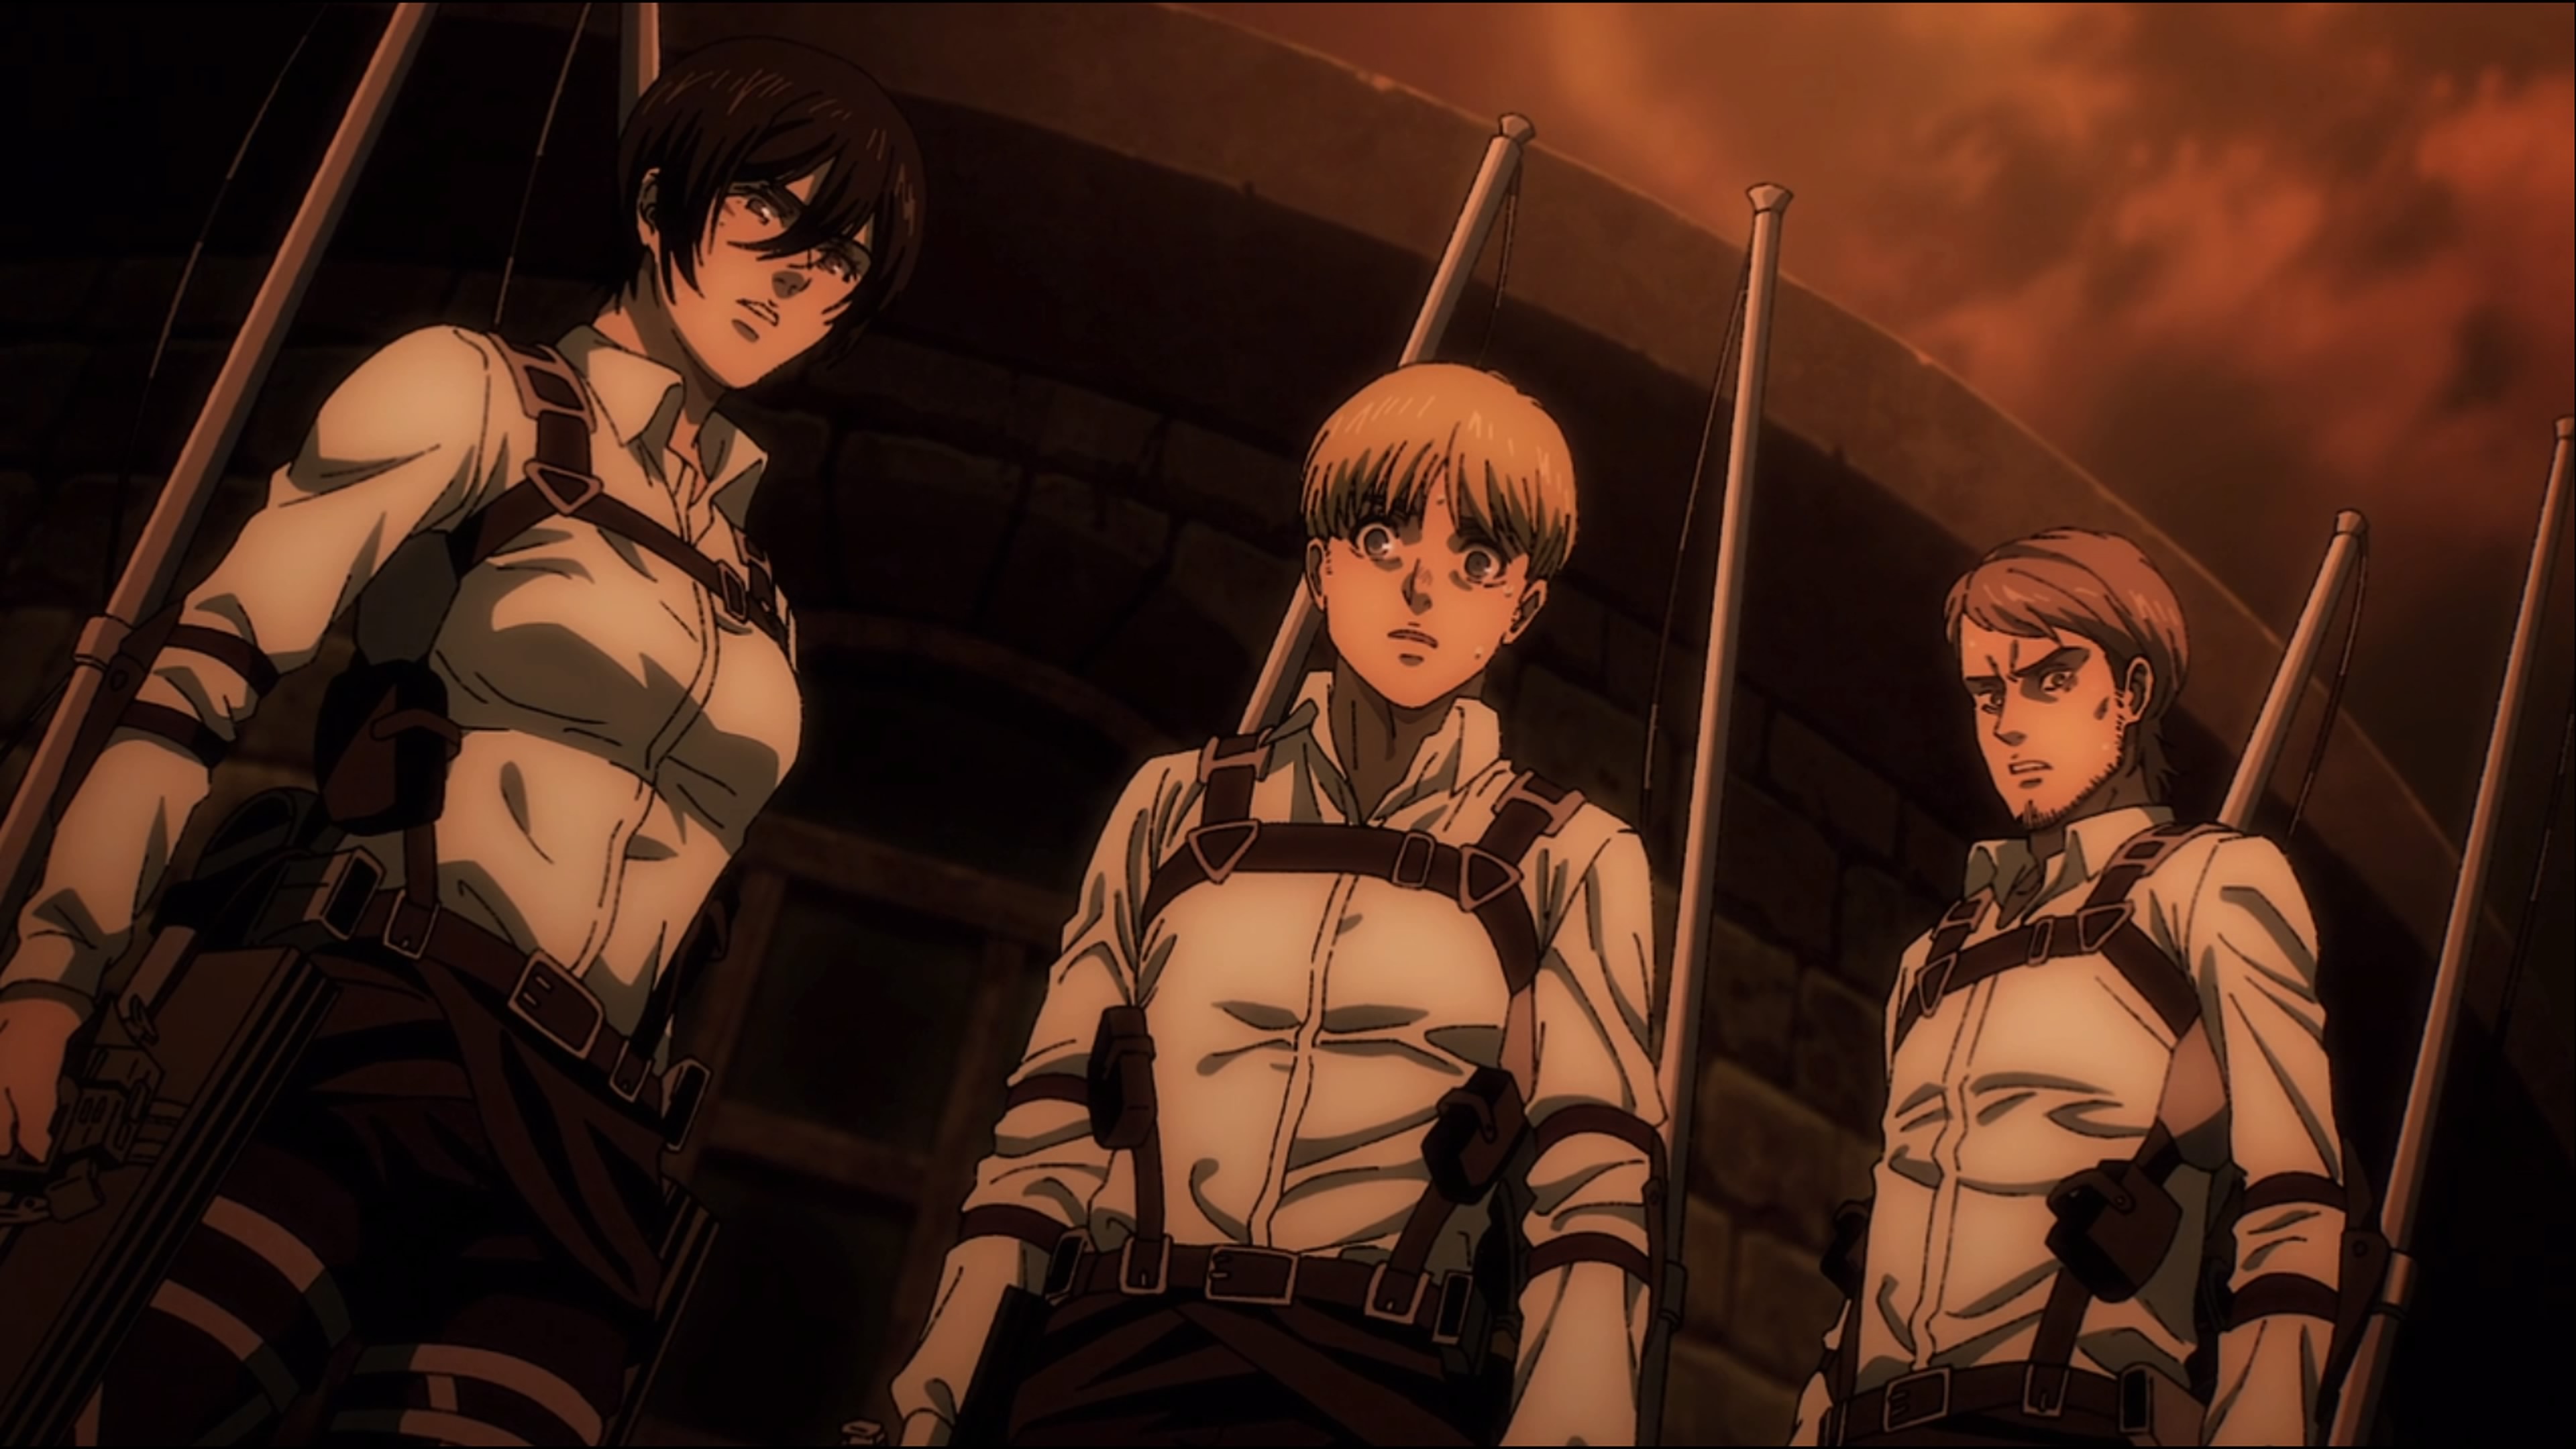 Attack on Titan' Final Season Gets a Part 2 With Episode 76 Coming